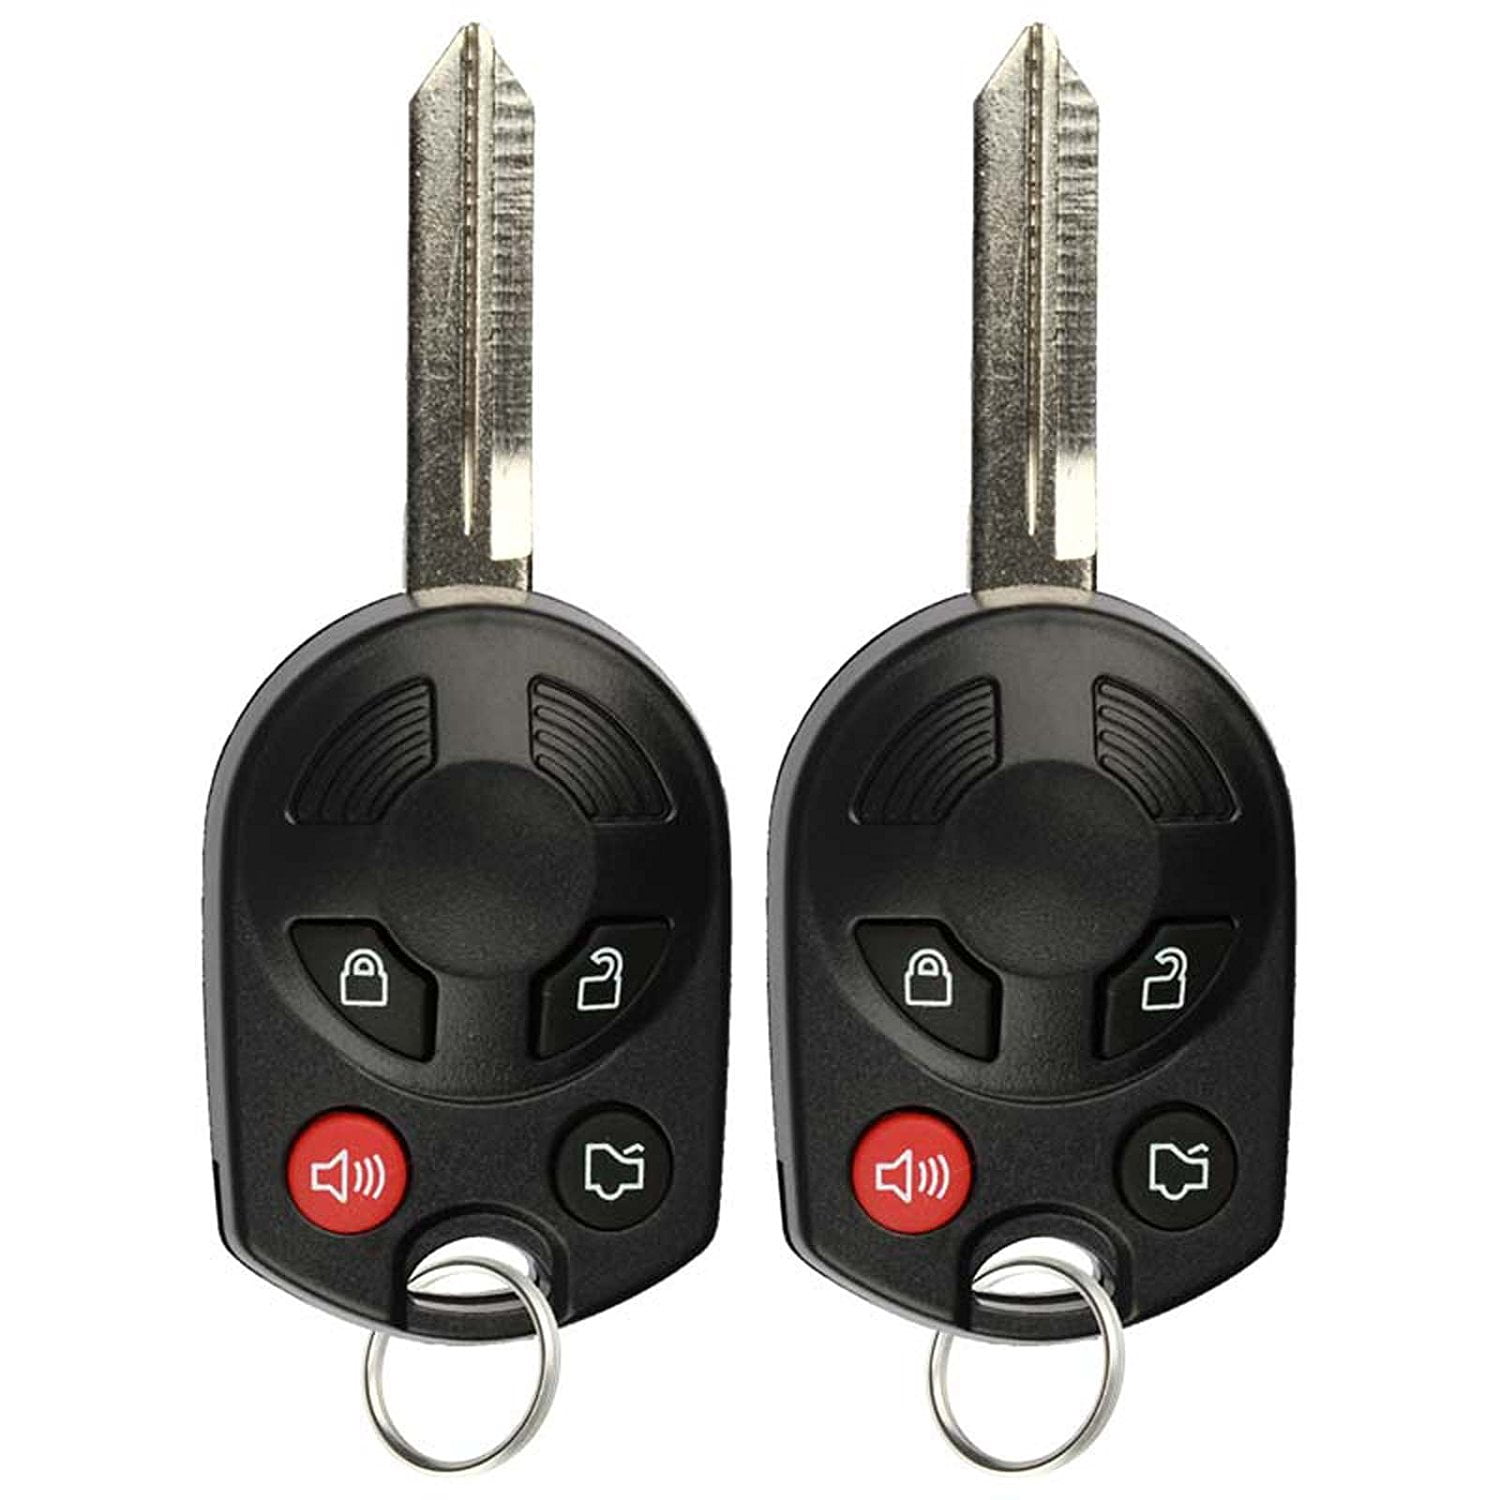 Replacement for Ford 2012-2016 Escape 2011-2016 Fiesta Remote Car Key Fob Pair 